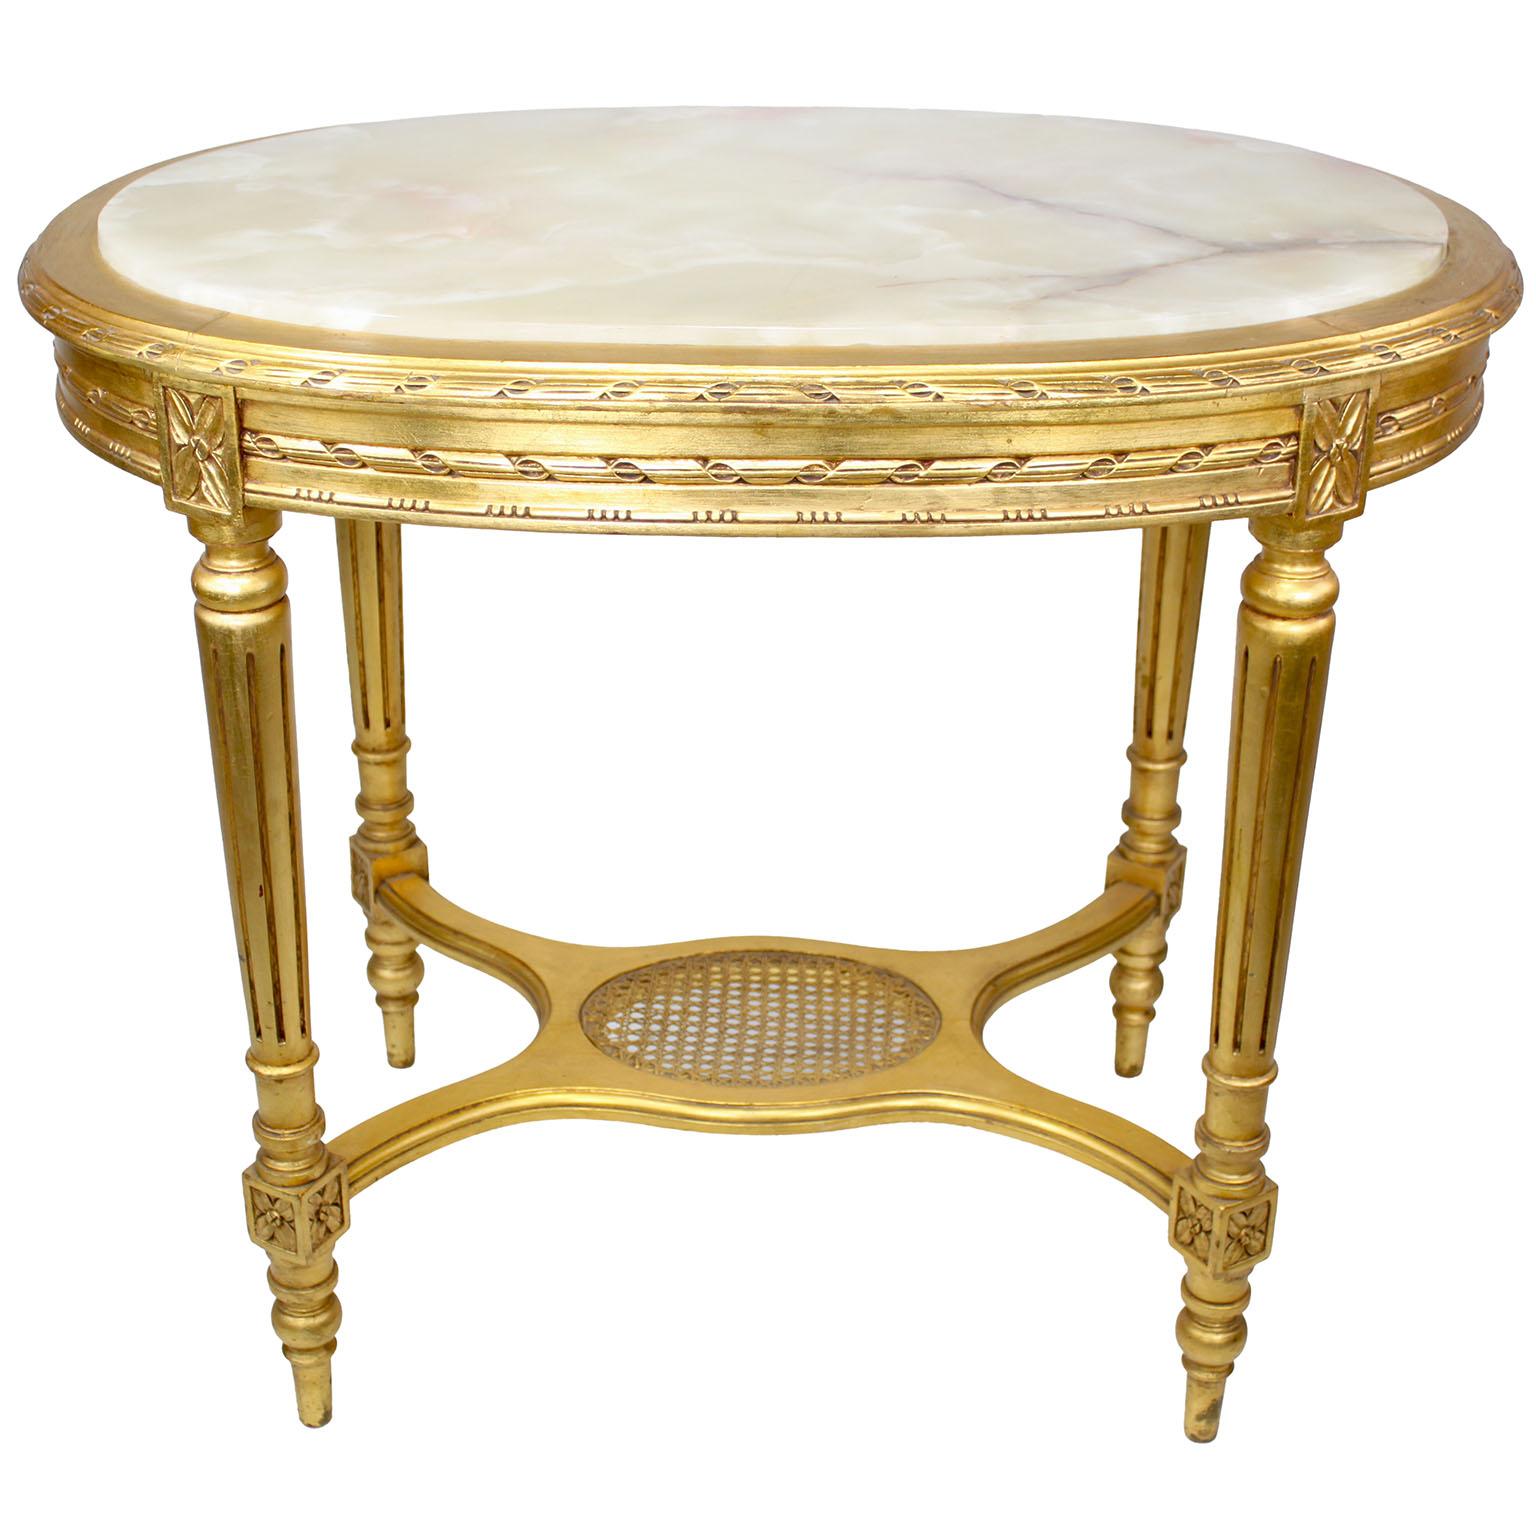 20th Century French Louis XVI Style Belle Époque Oval Giltwood Carved Center Table w/Onyx Top For Sale